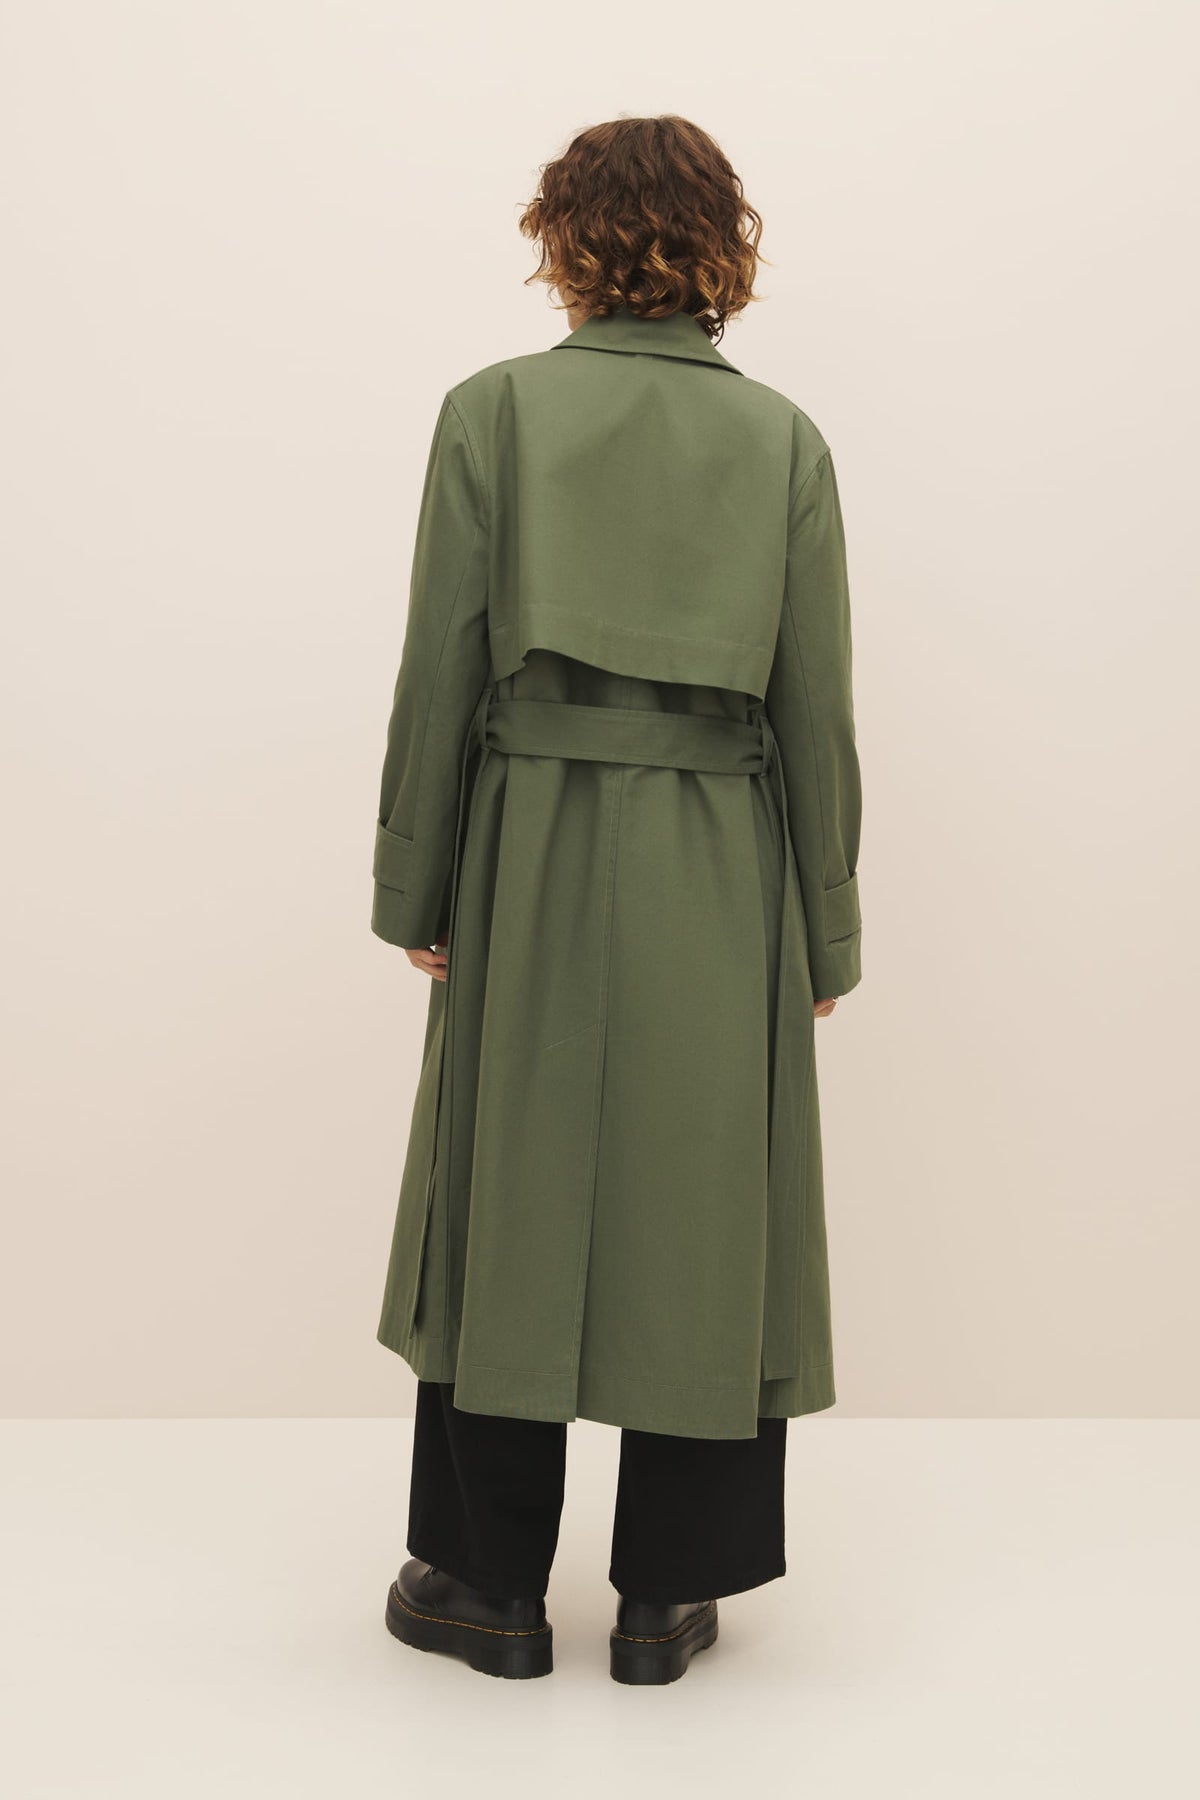 Woman standing with her back to the camera, wearing a Kowtow Cleo Trench Coat in Sage and black trousers in a relaxed fit.